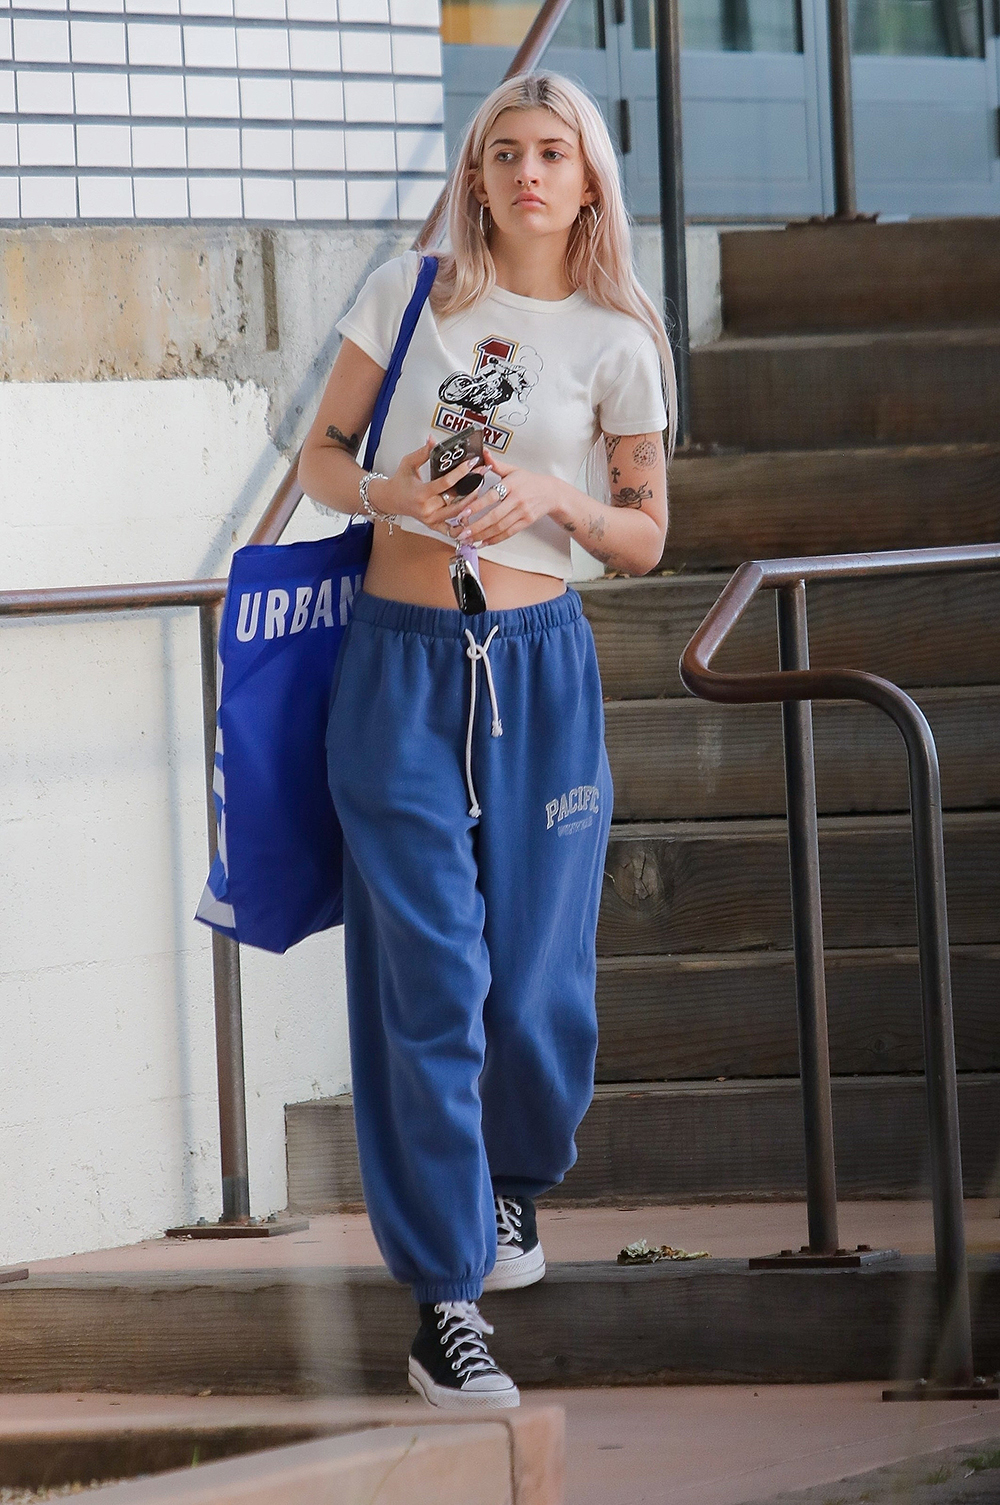 https://hollywoodlife.com/wp-content/uploads/2023/01/sami-sheen-in-casual-sweats-and-crop-top-backgrid-1.jpg